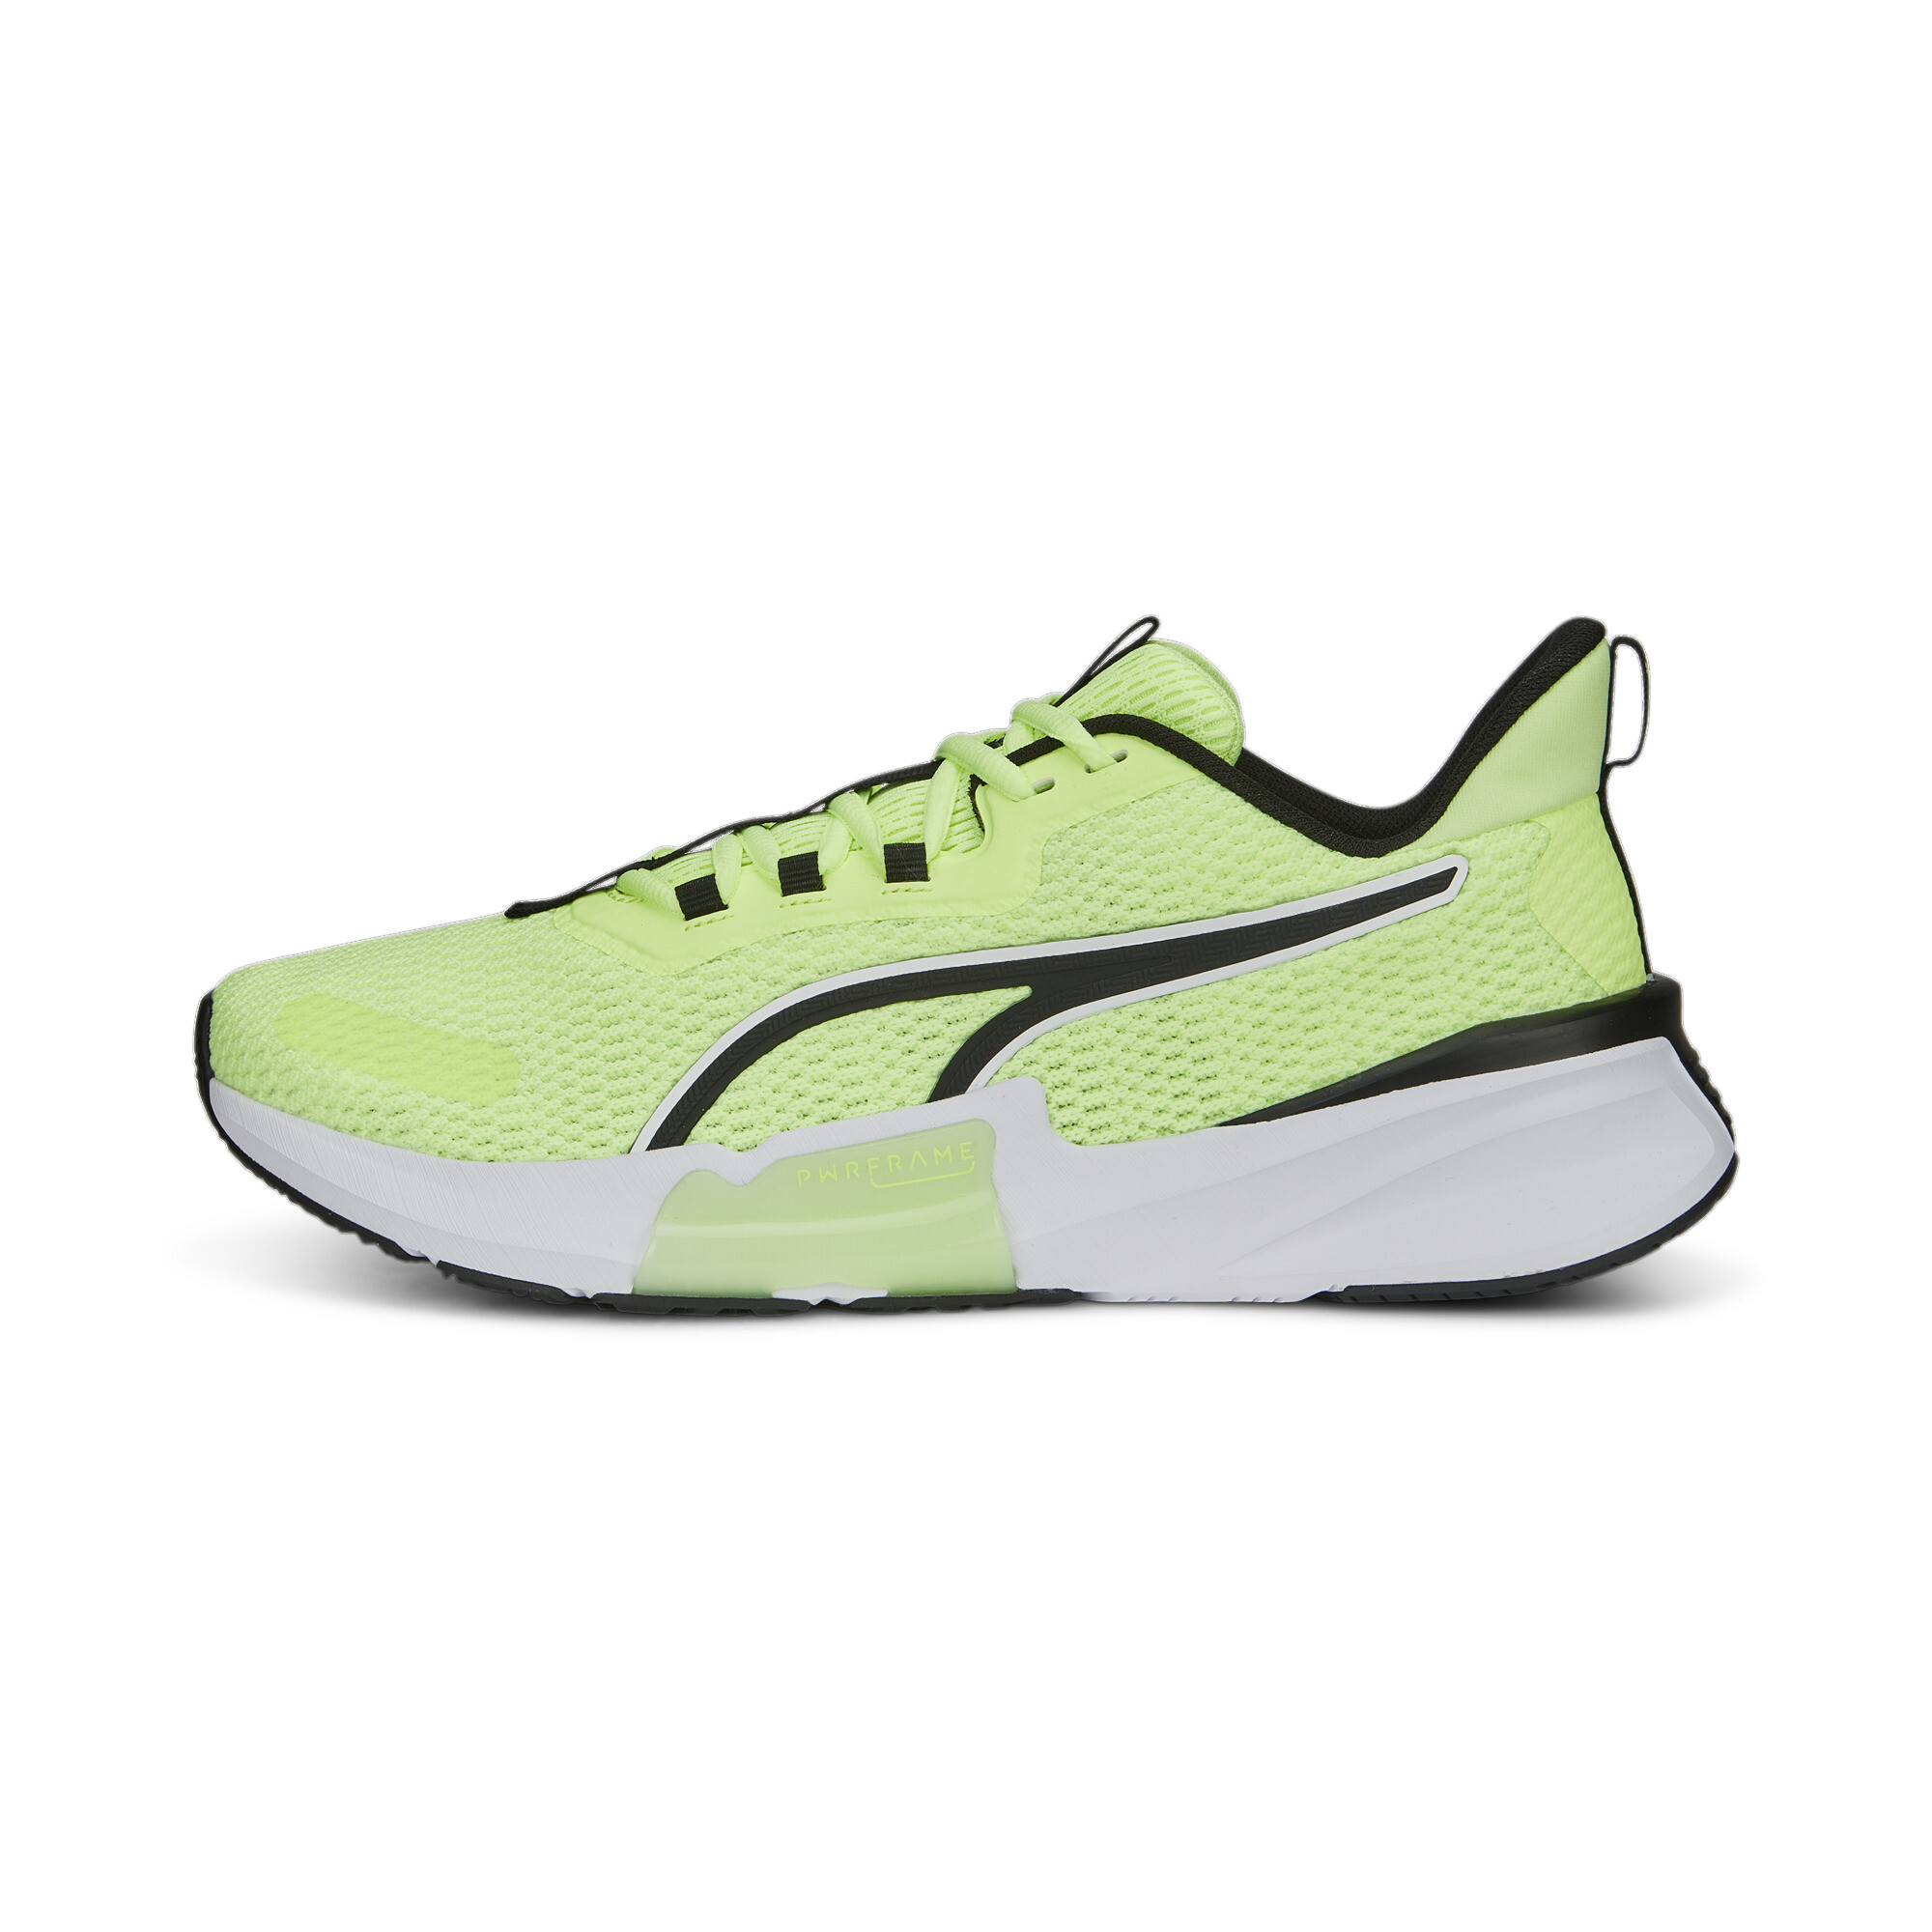 Men's Puma PWRFrame TR 2's Training Shoes, Yellow, Size 40.5, Shoes